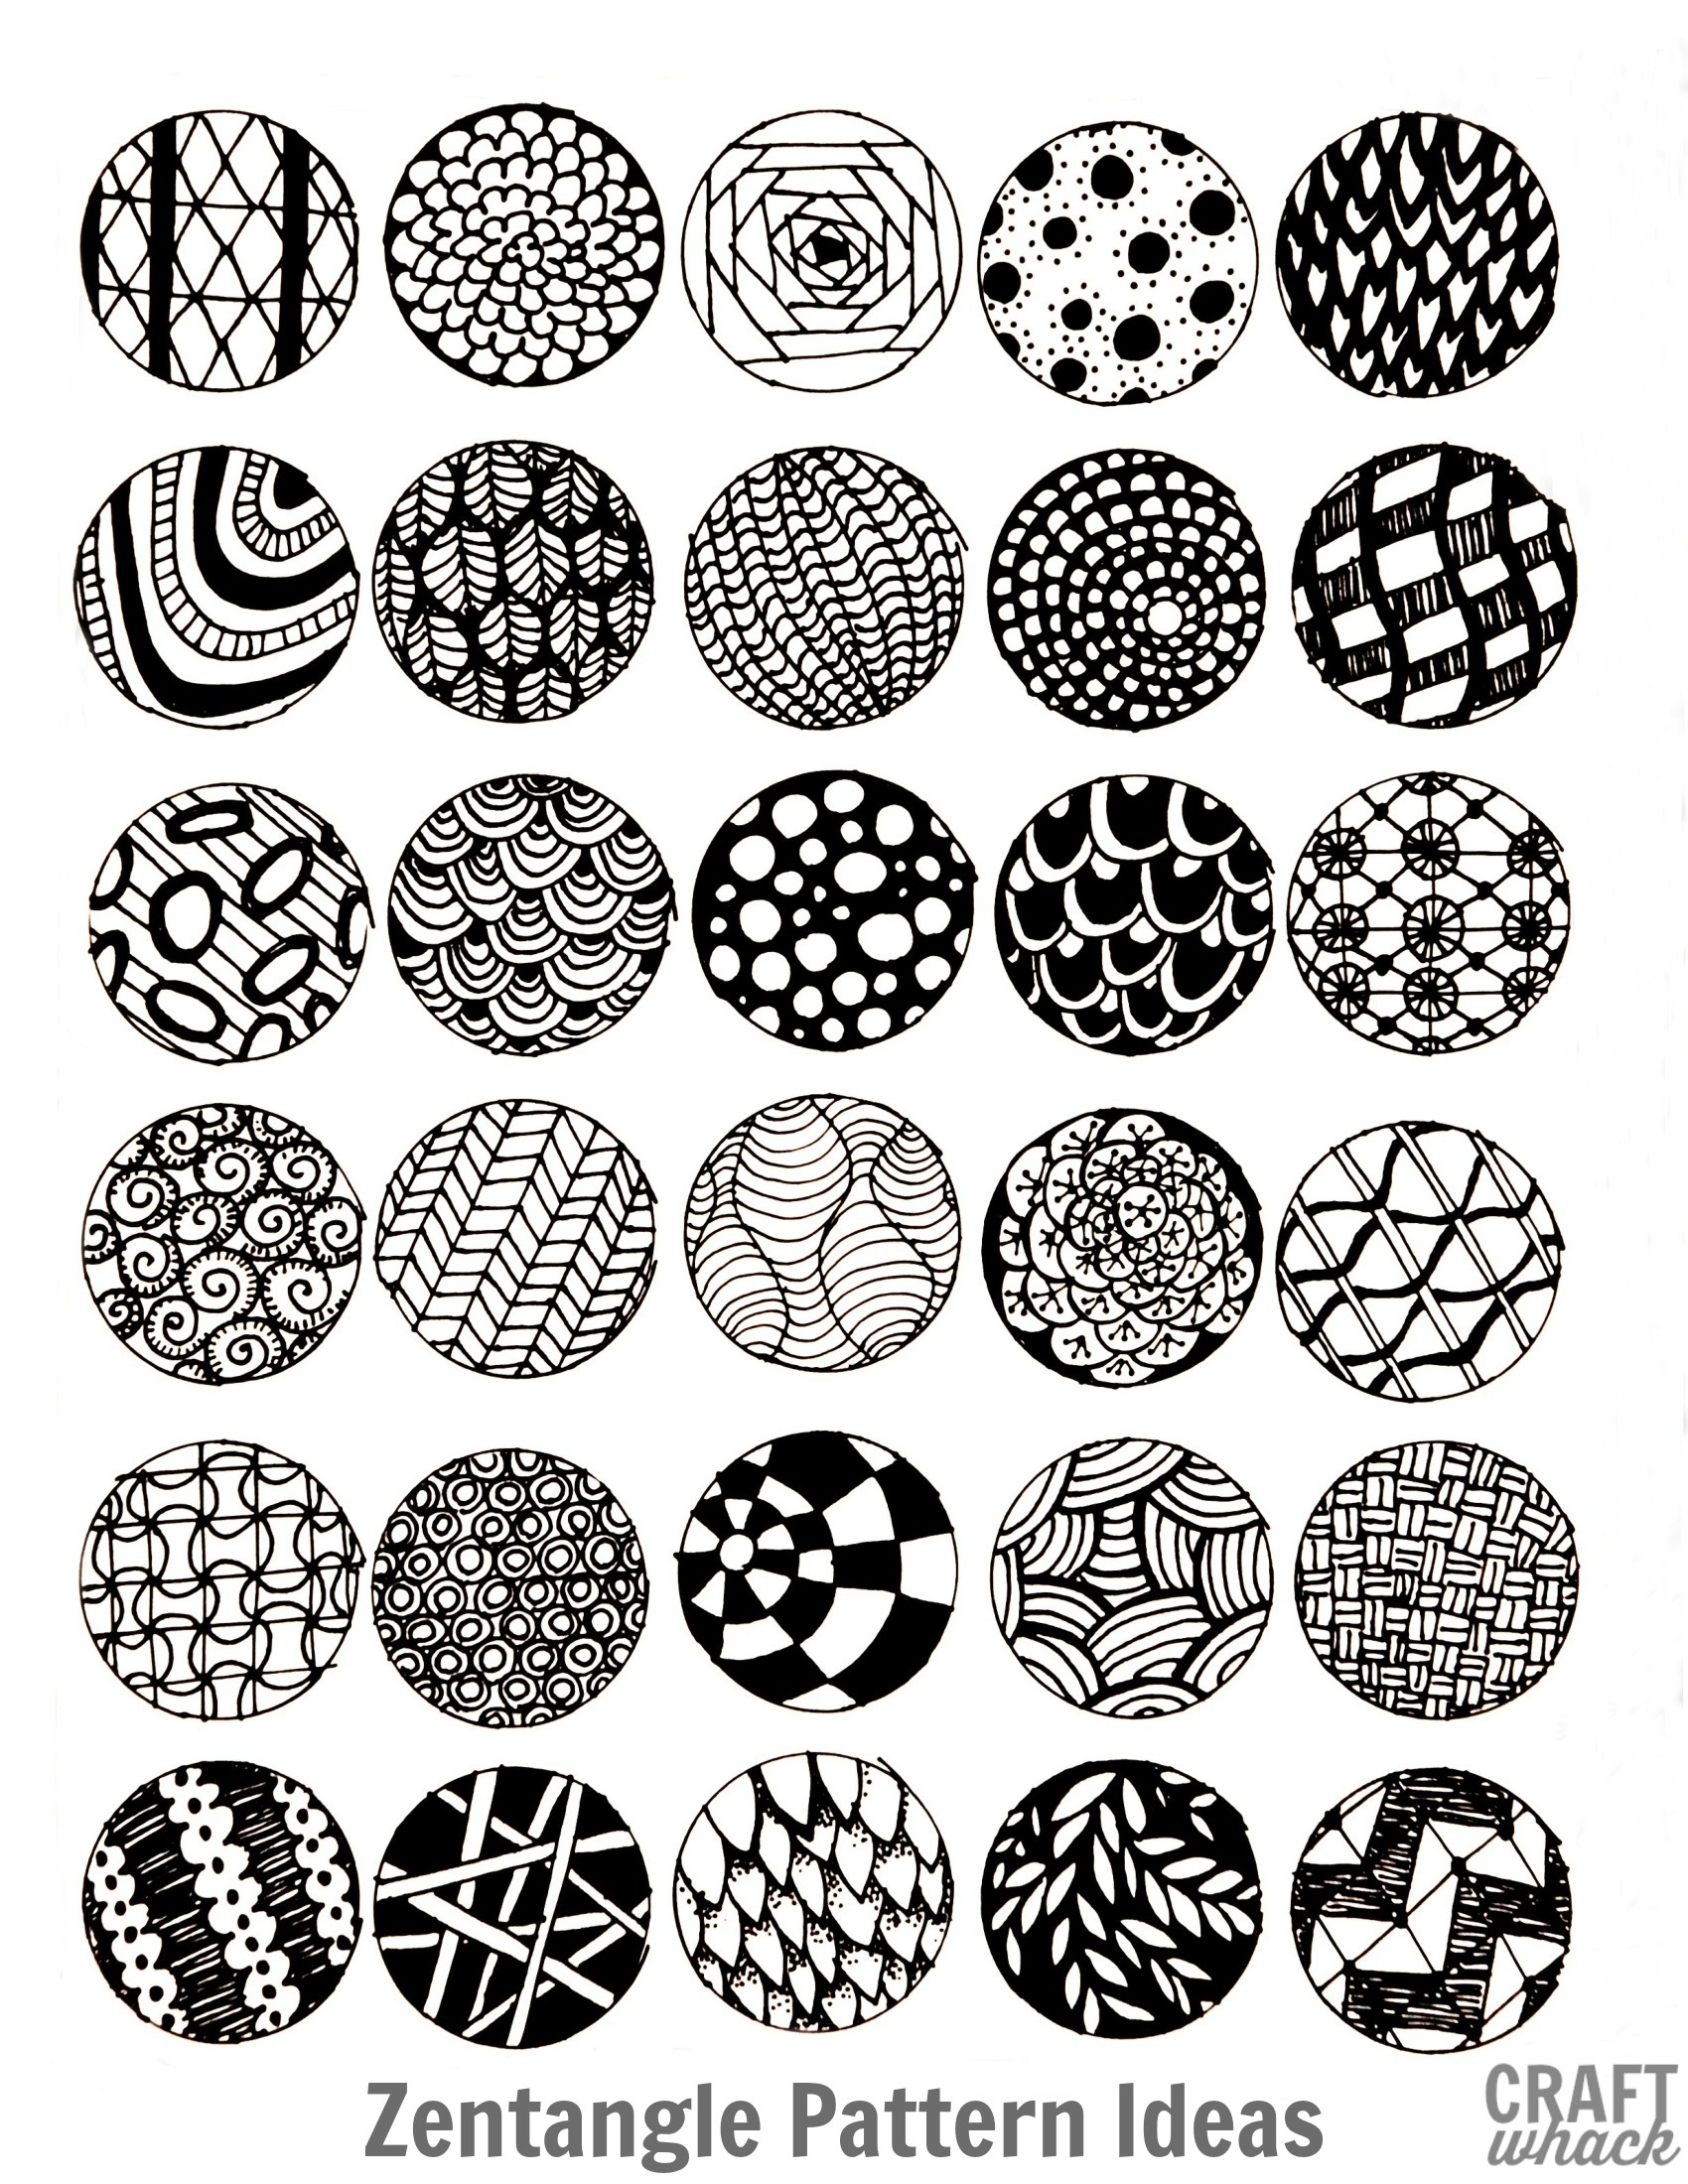 Inspiredzentangle: Patterns And Starter Pages · Craftwhack - Free Printable Zentangle Templates